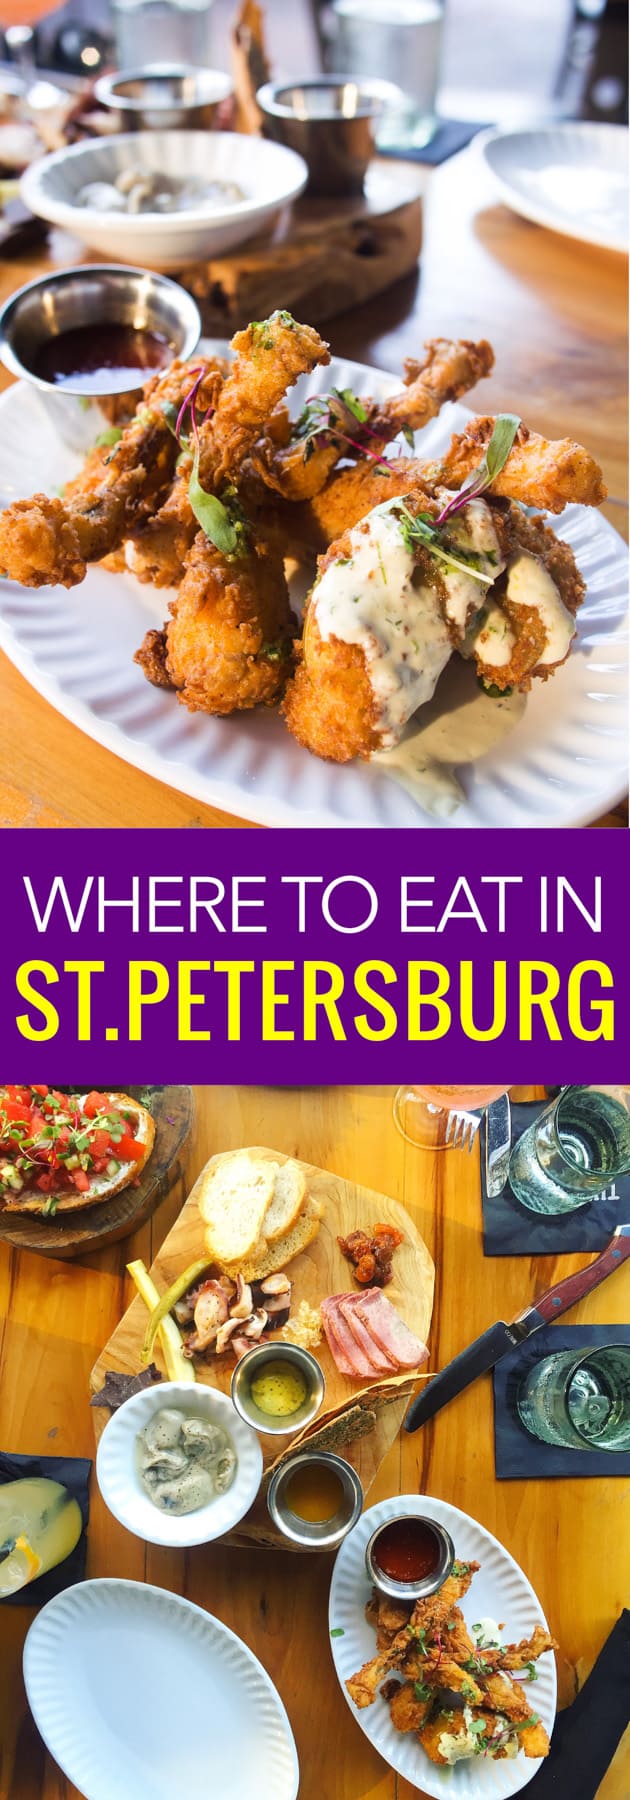  St.Petersburg is a city evolving into one of the best craft beer and food places in Florida. Here are our can't miss restaurants in St. Petersburg.